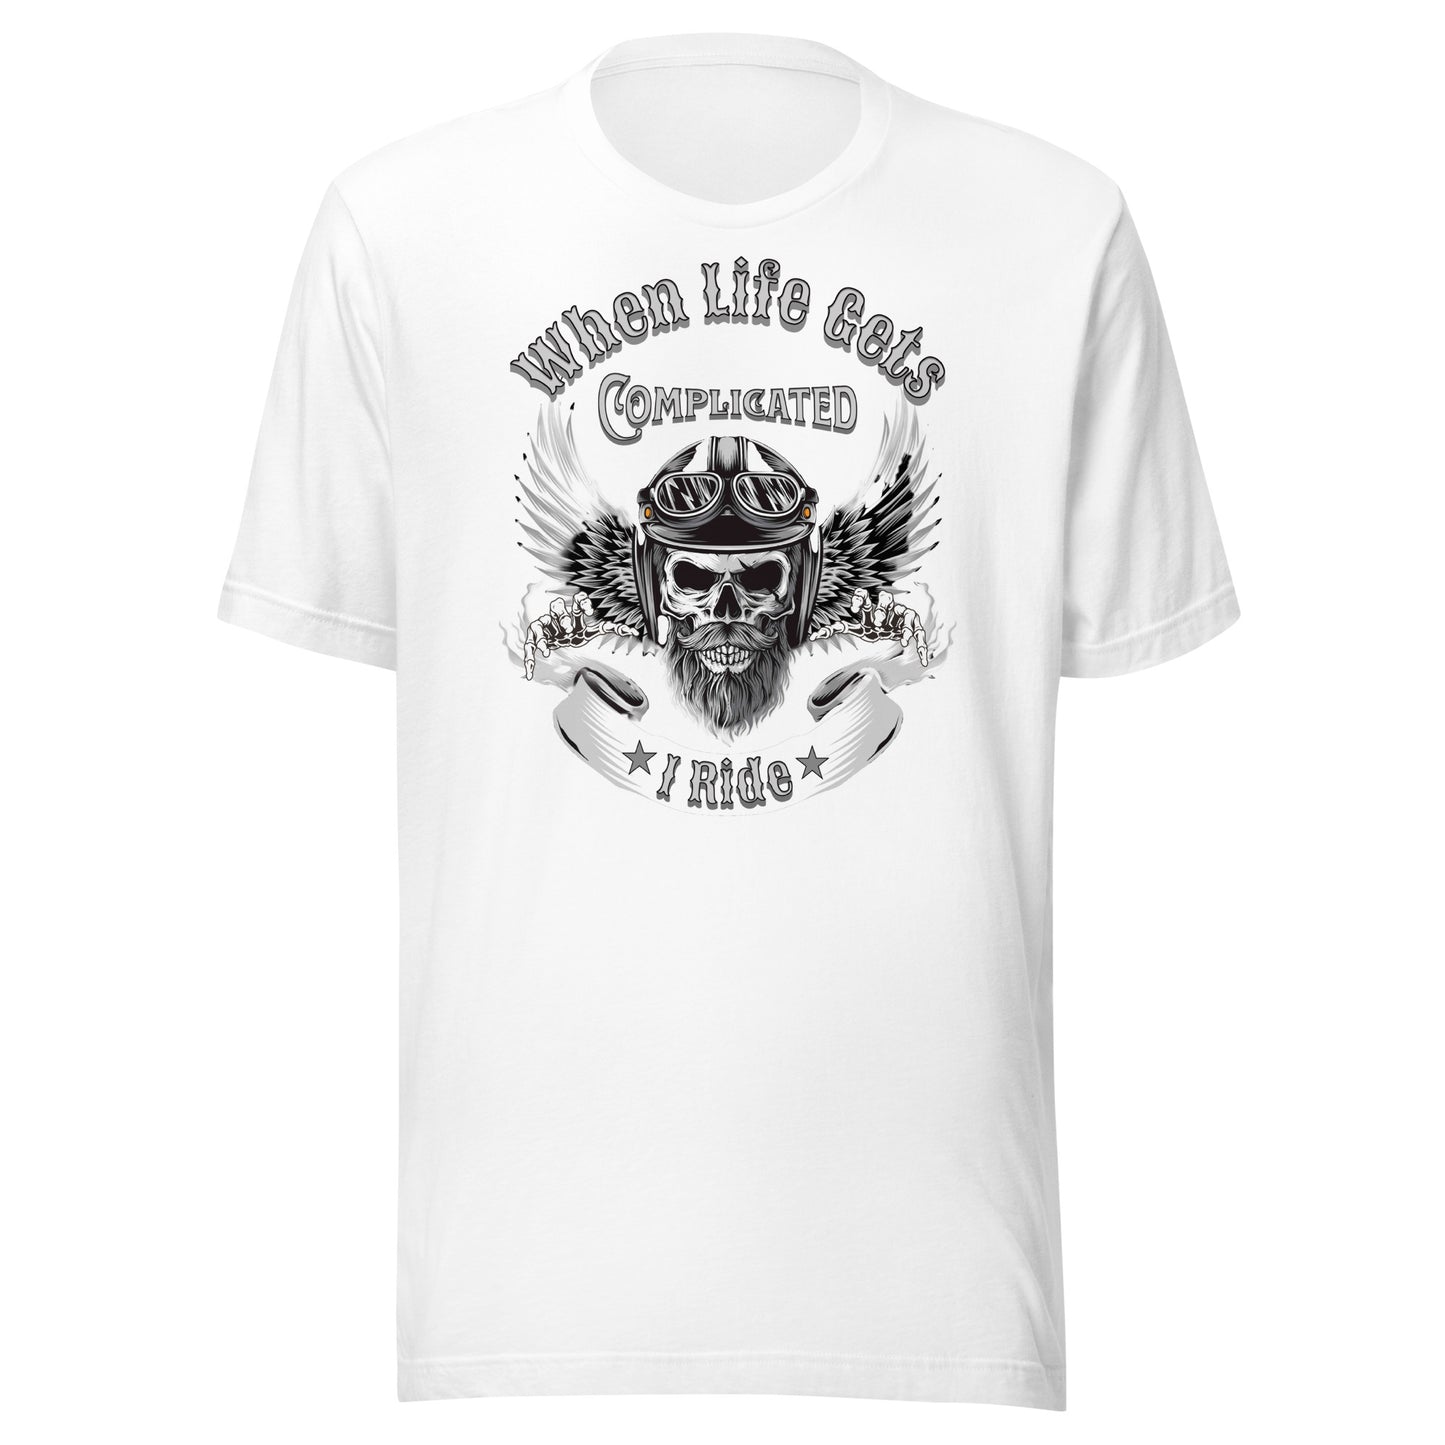 When Life Gets Complicated, I Ride Unisex t-shirt